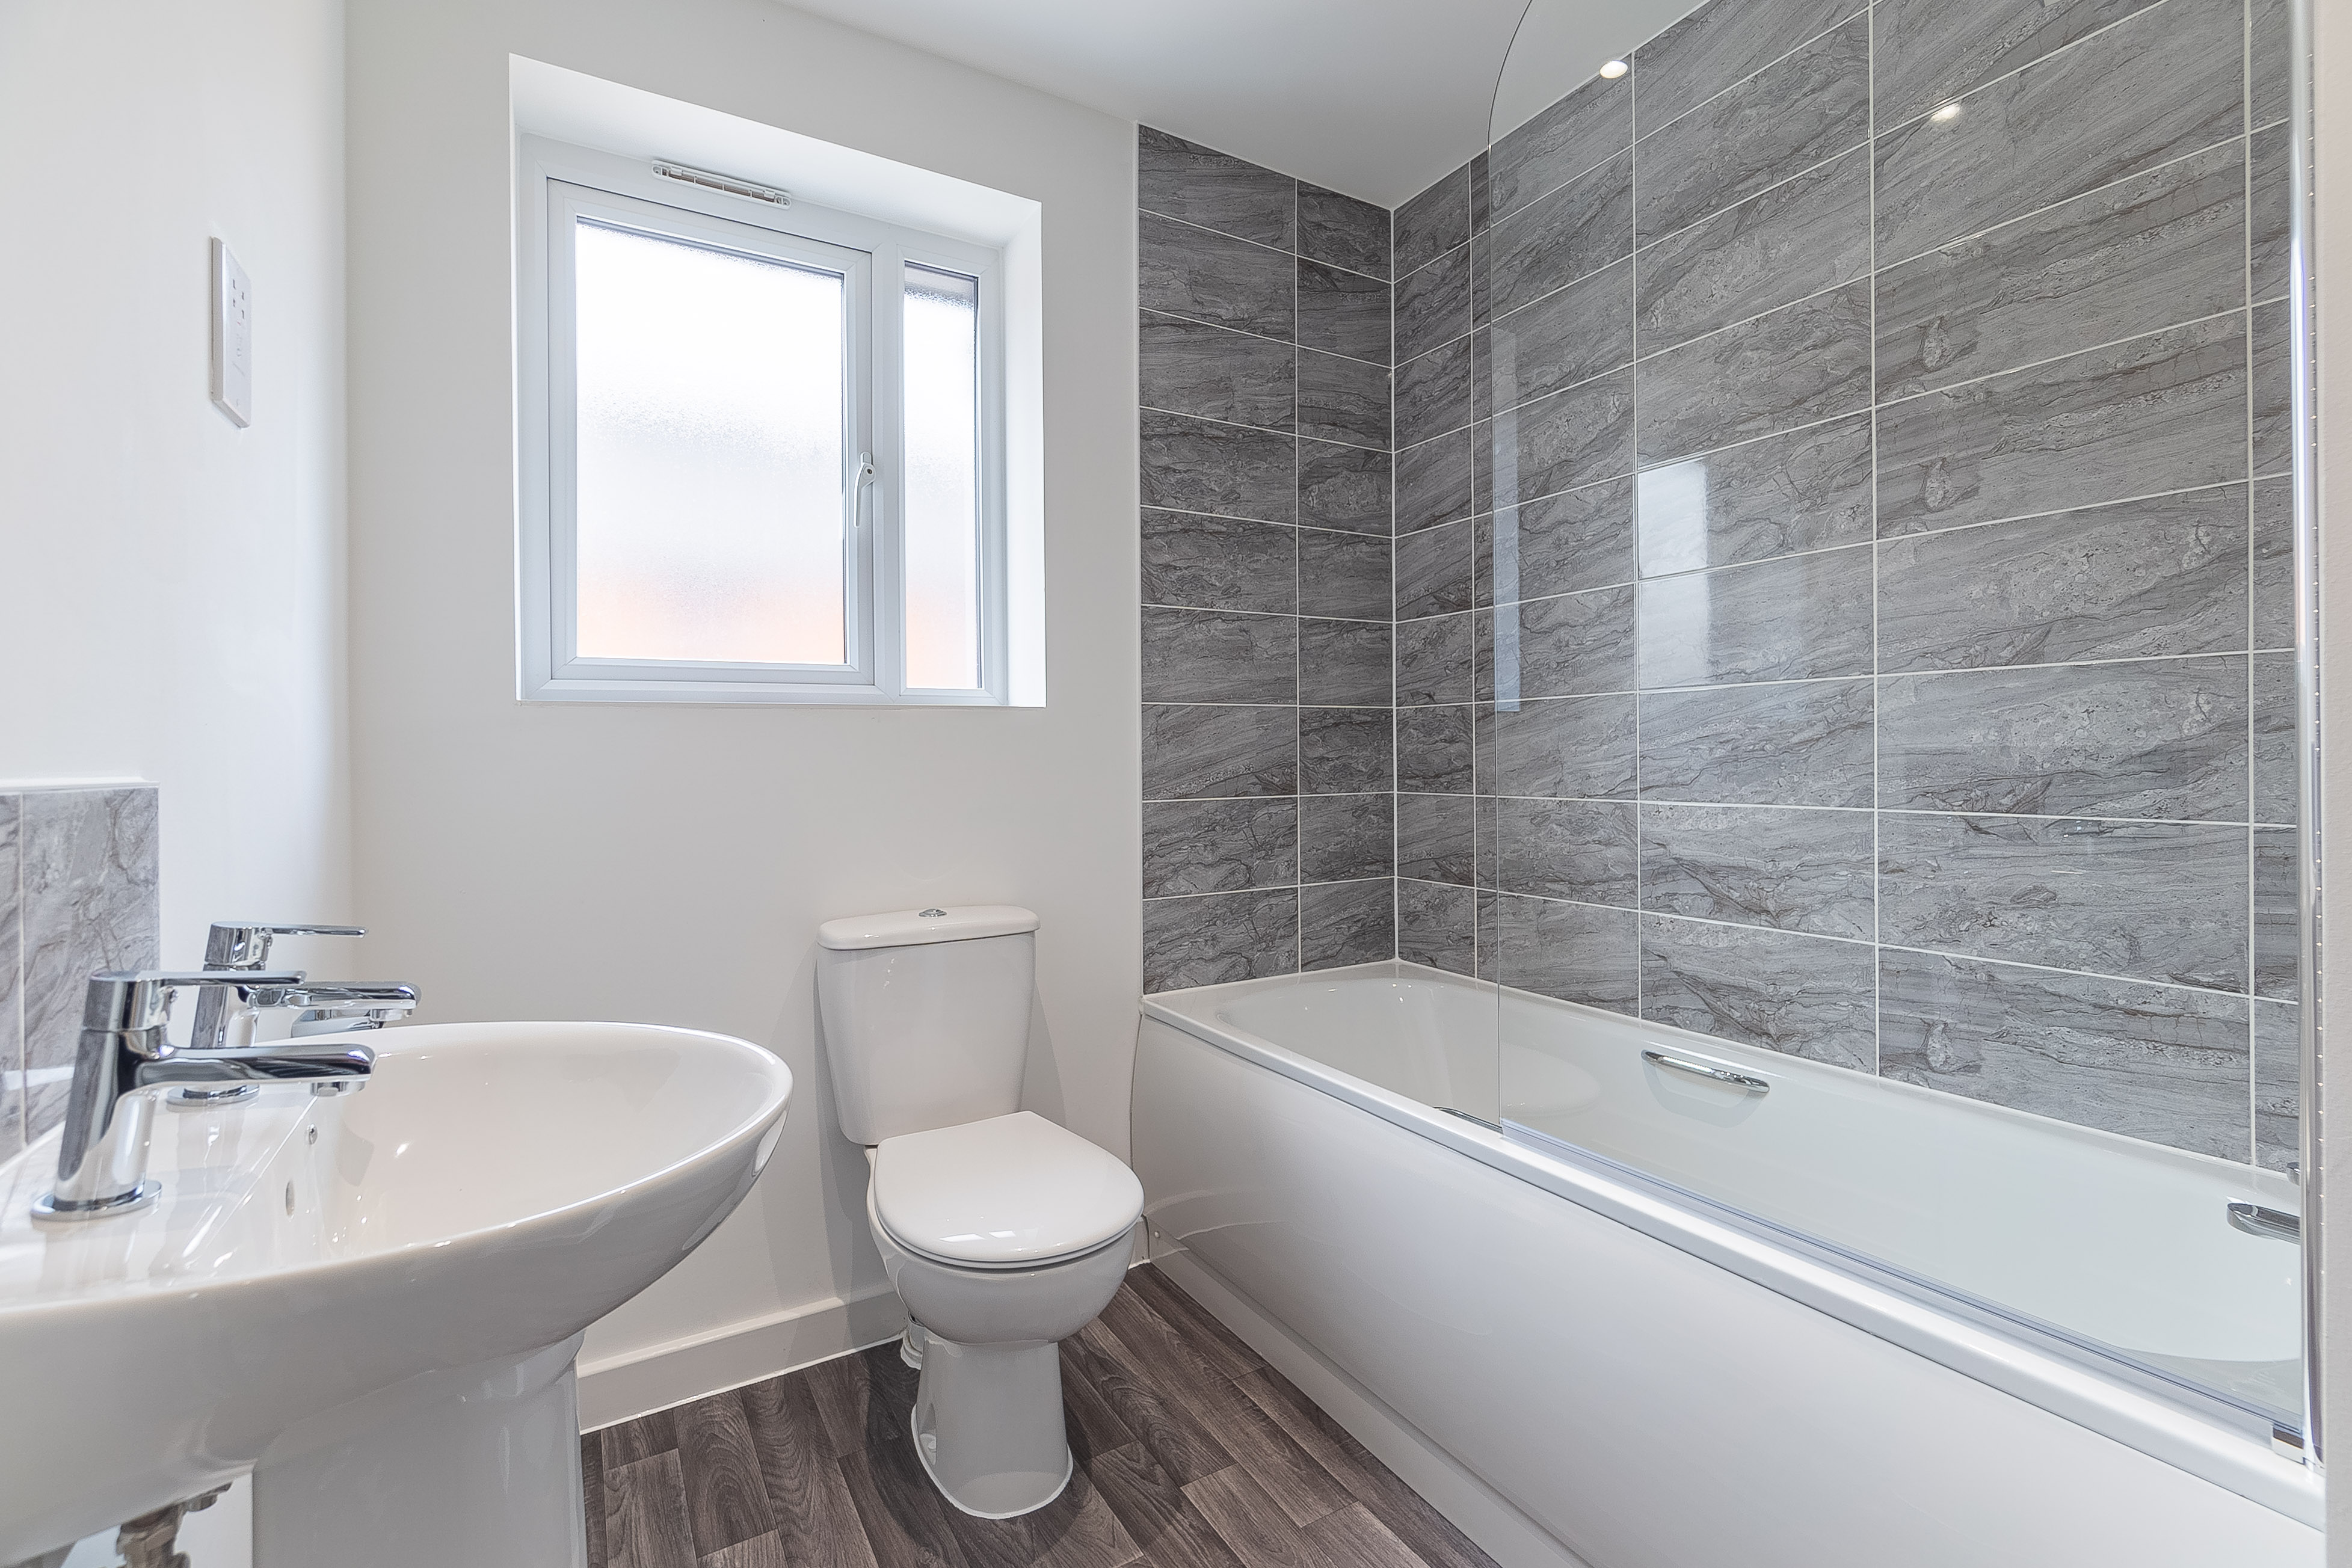 Bathroom of a 3 Bedroom House at Whiteley Meadow available for Shared Ownership